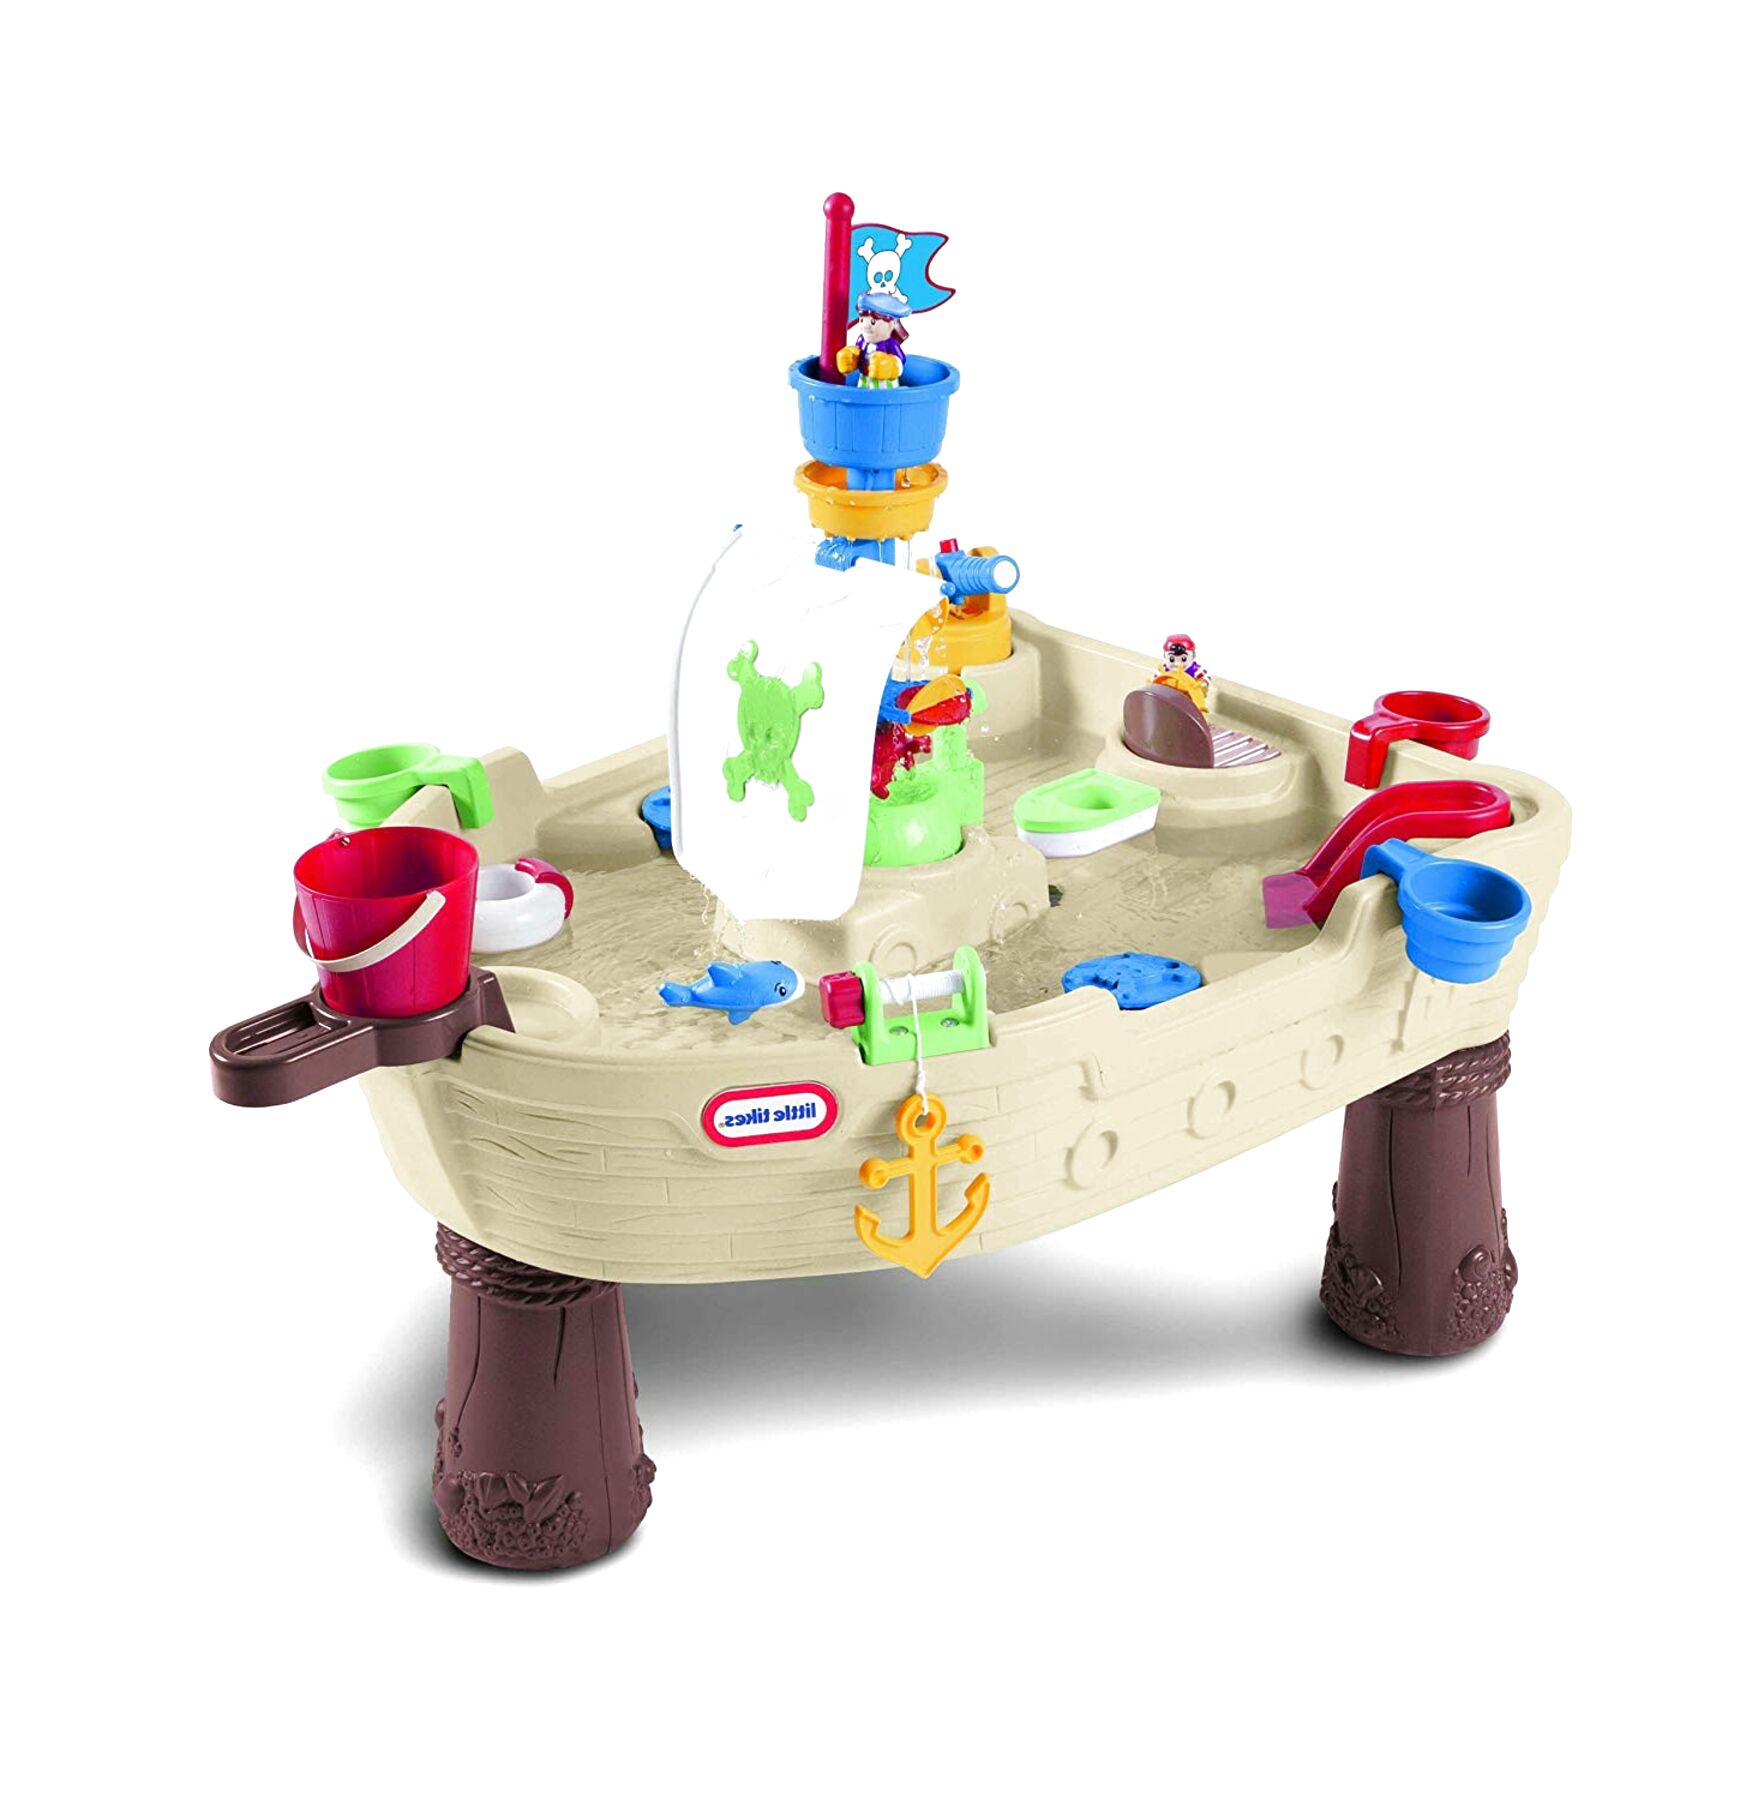 Little Tikes Pirate Ship for sale in UK | 56 used Little Tikes Pirate Ships